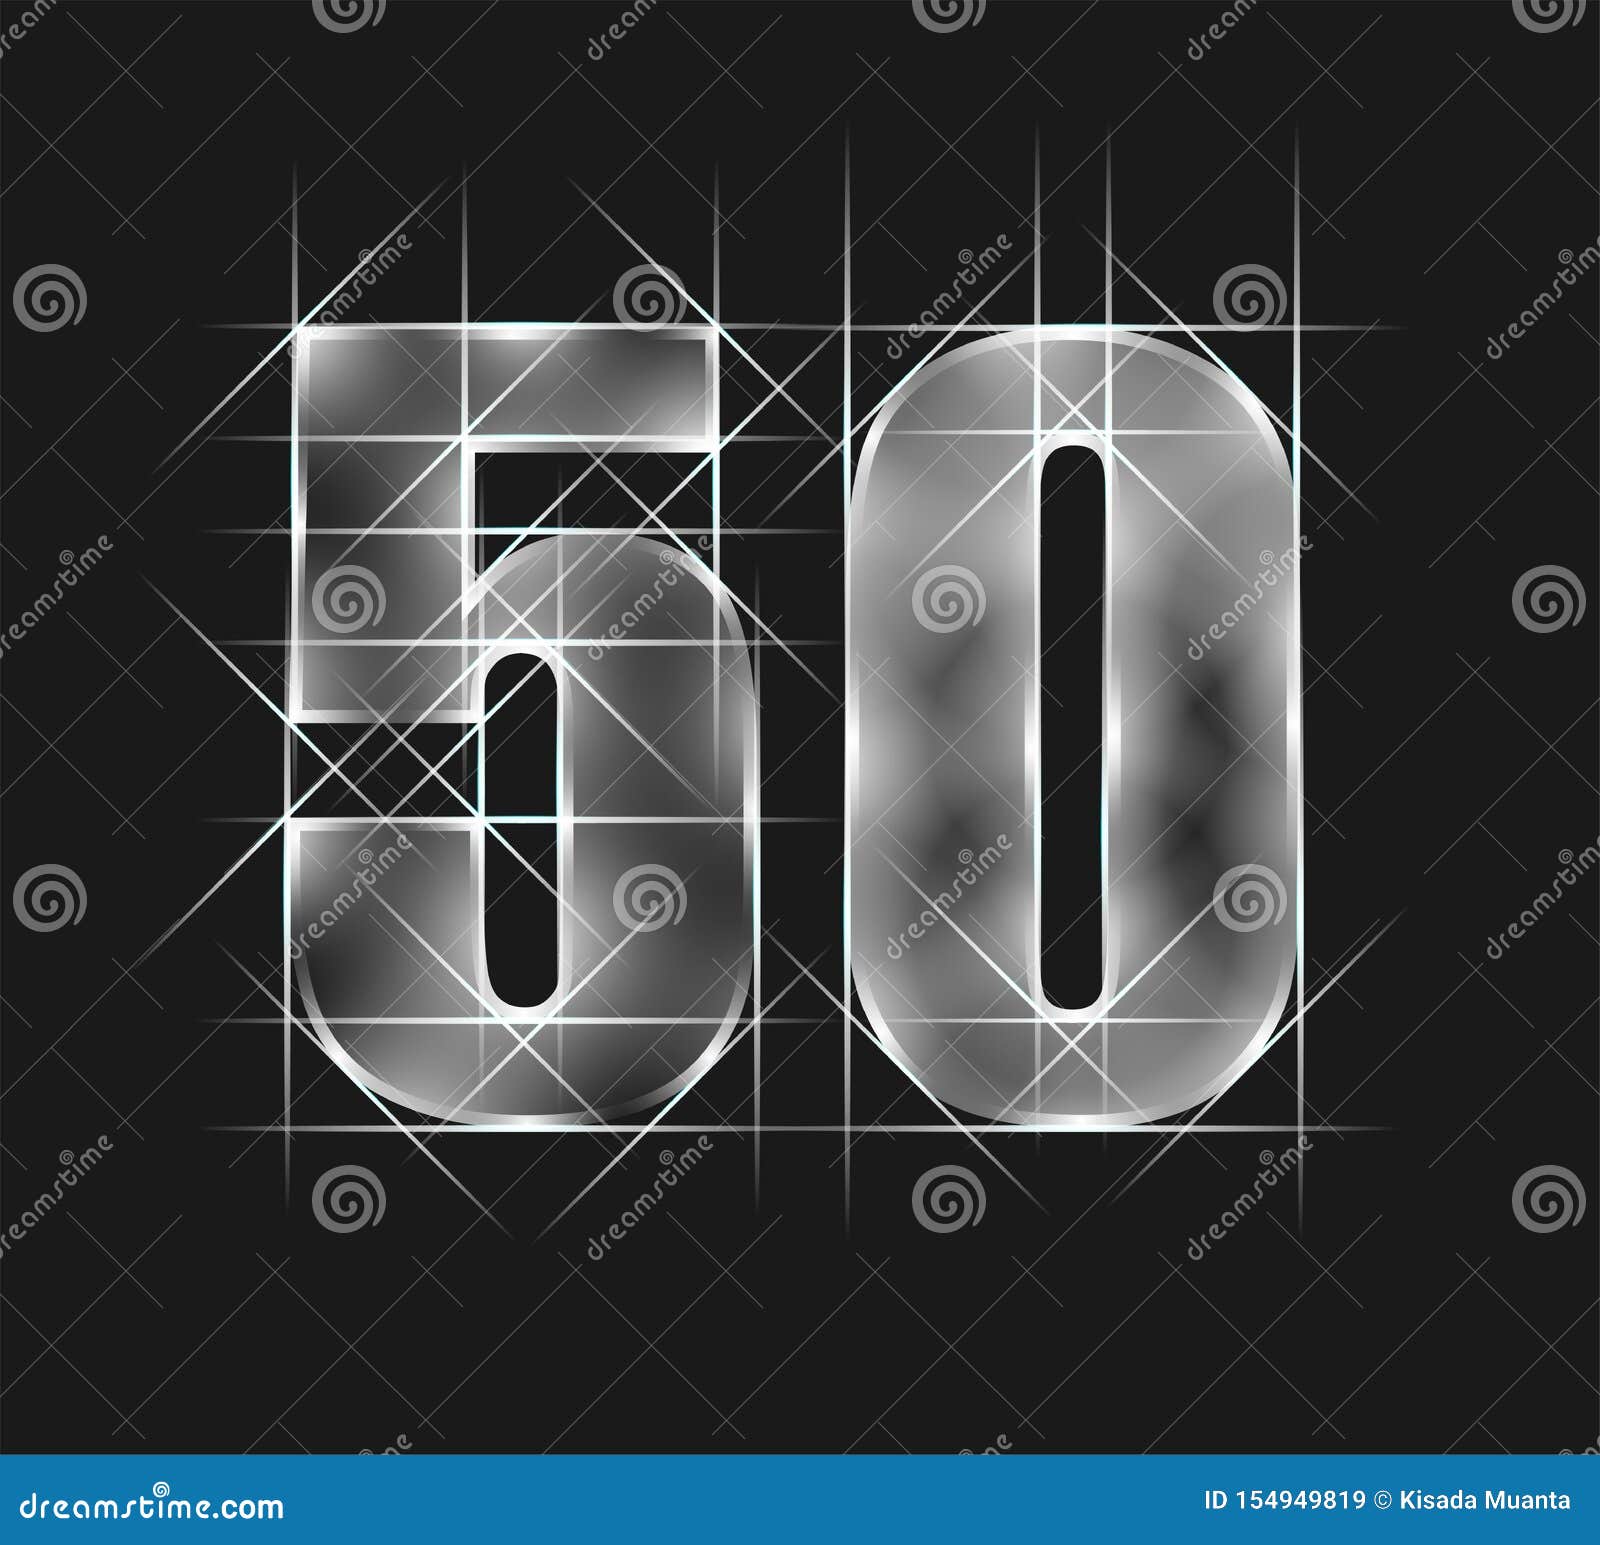 luxury abstract scintillation emerald crystal glass number 50 fifty character. gray tone background.   eps10